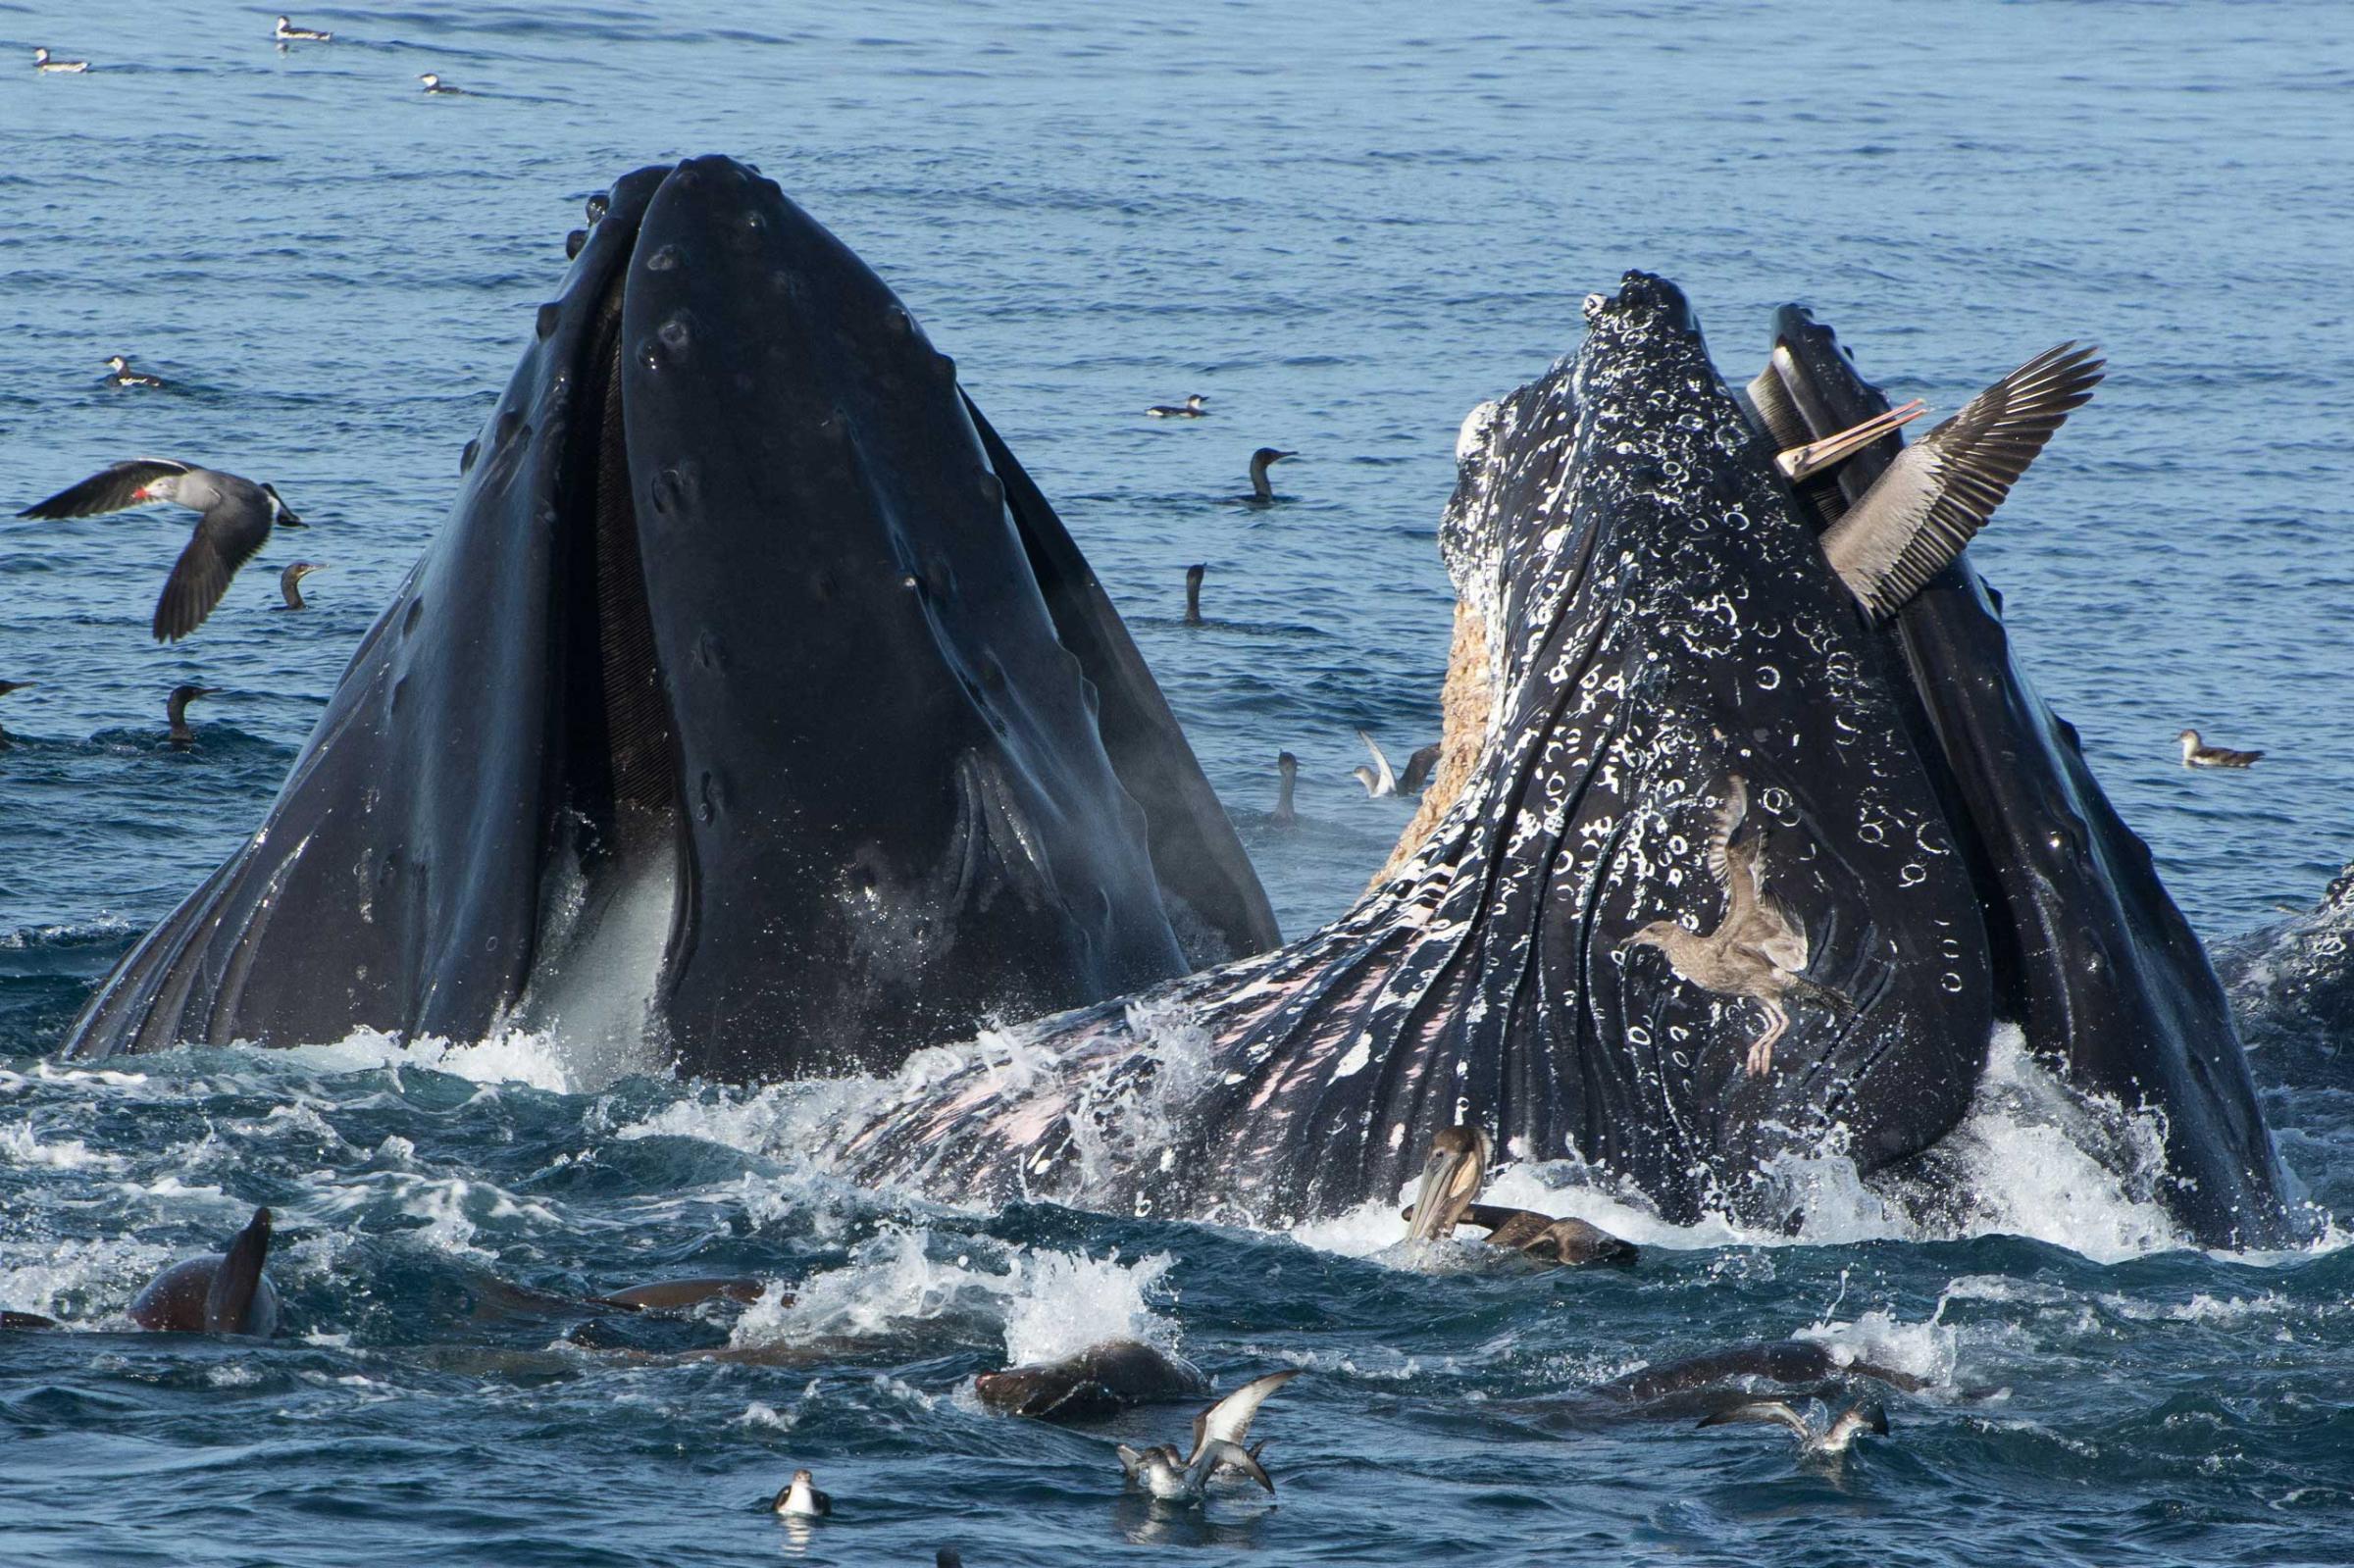 A whale captures a pelican between its jaws, Monteray Bay, Calif., Nov. 23, 2014.